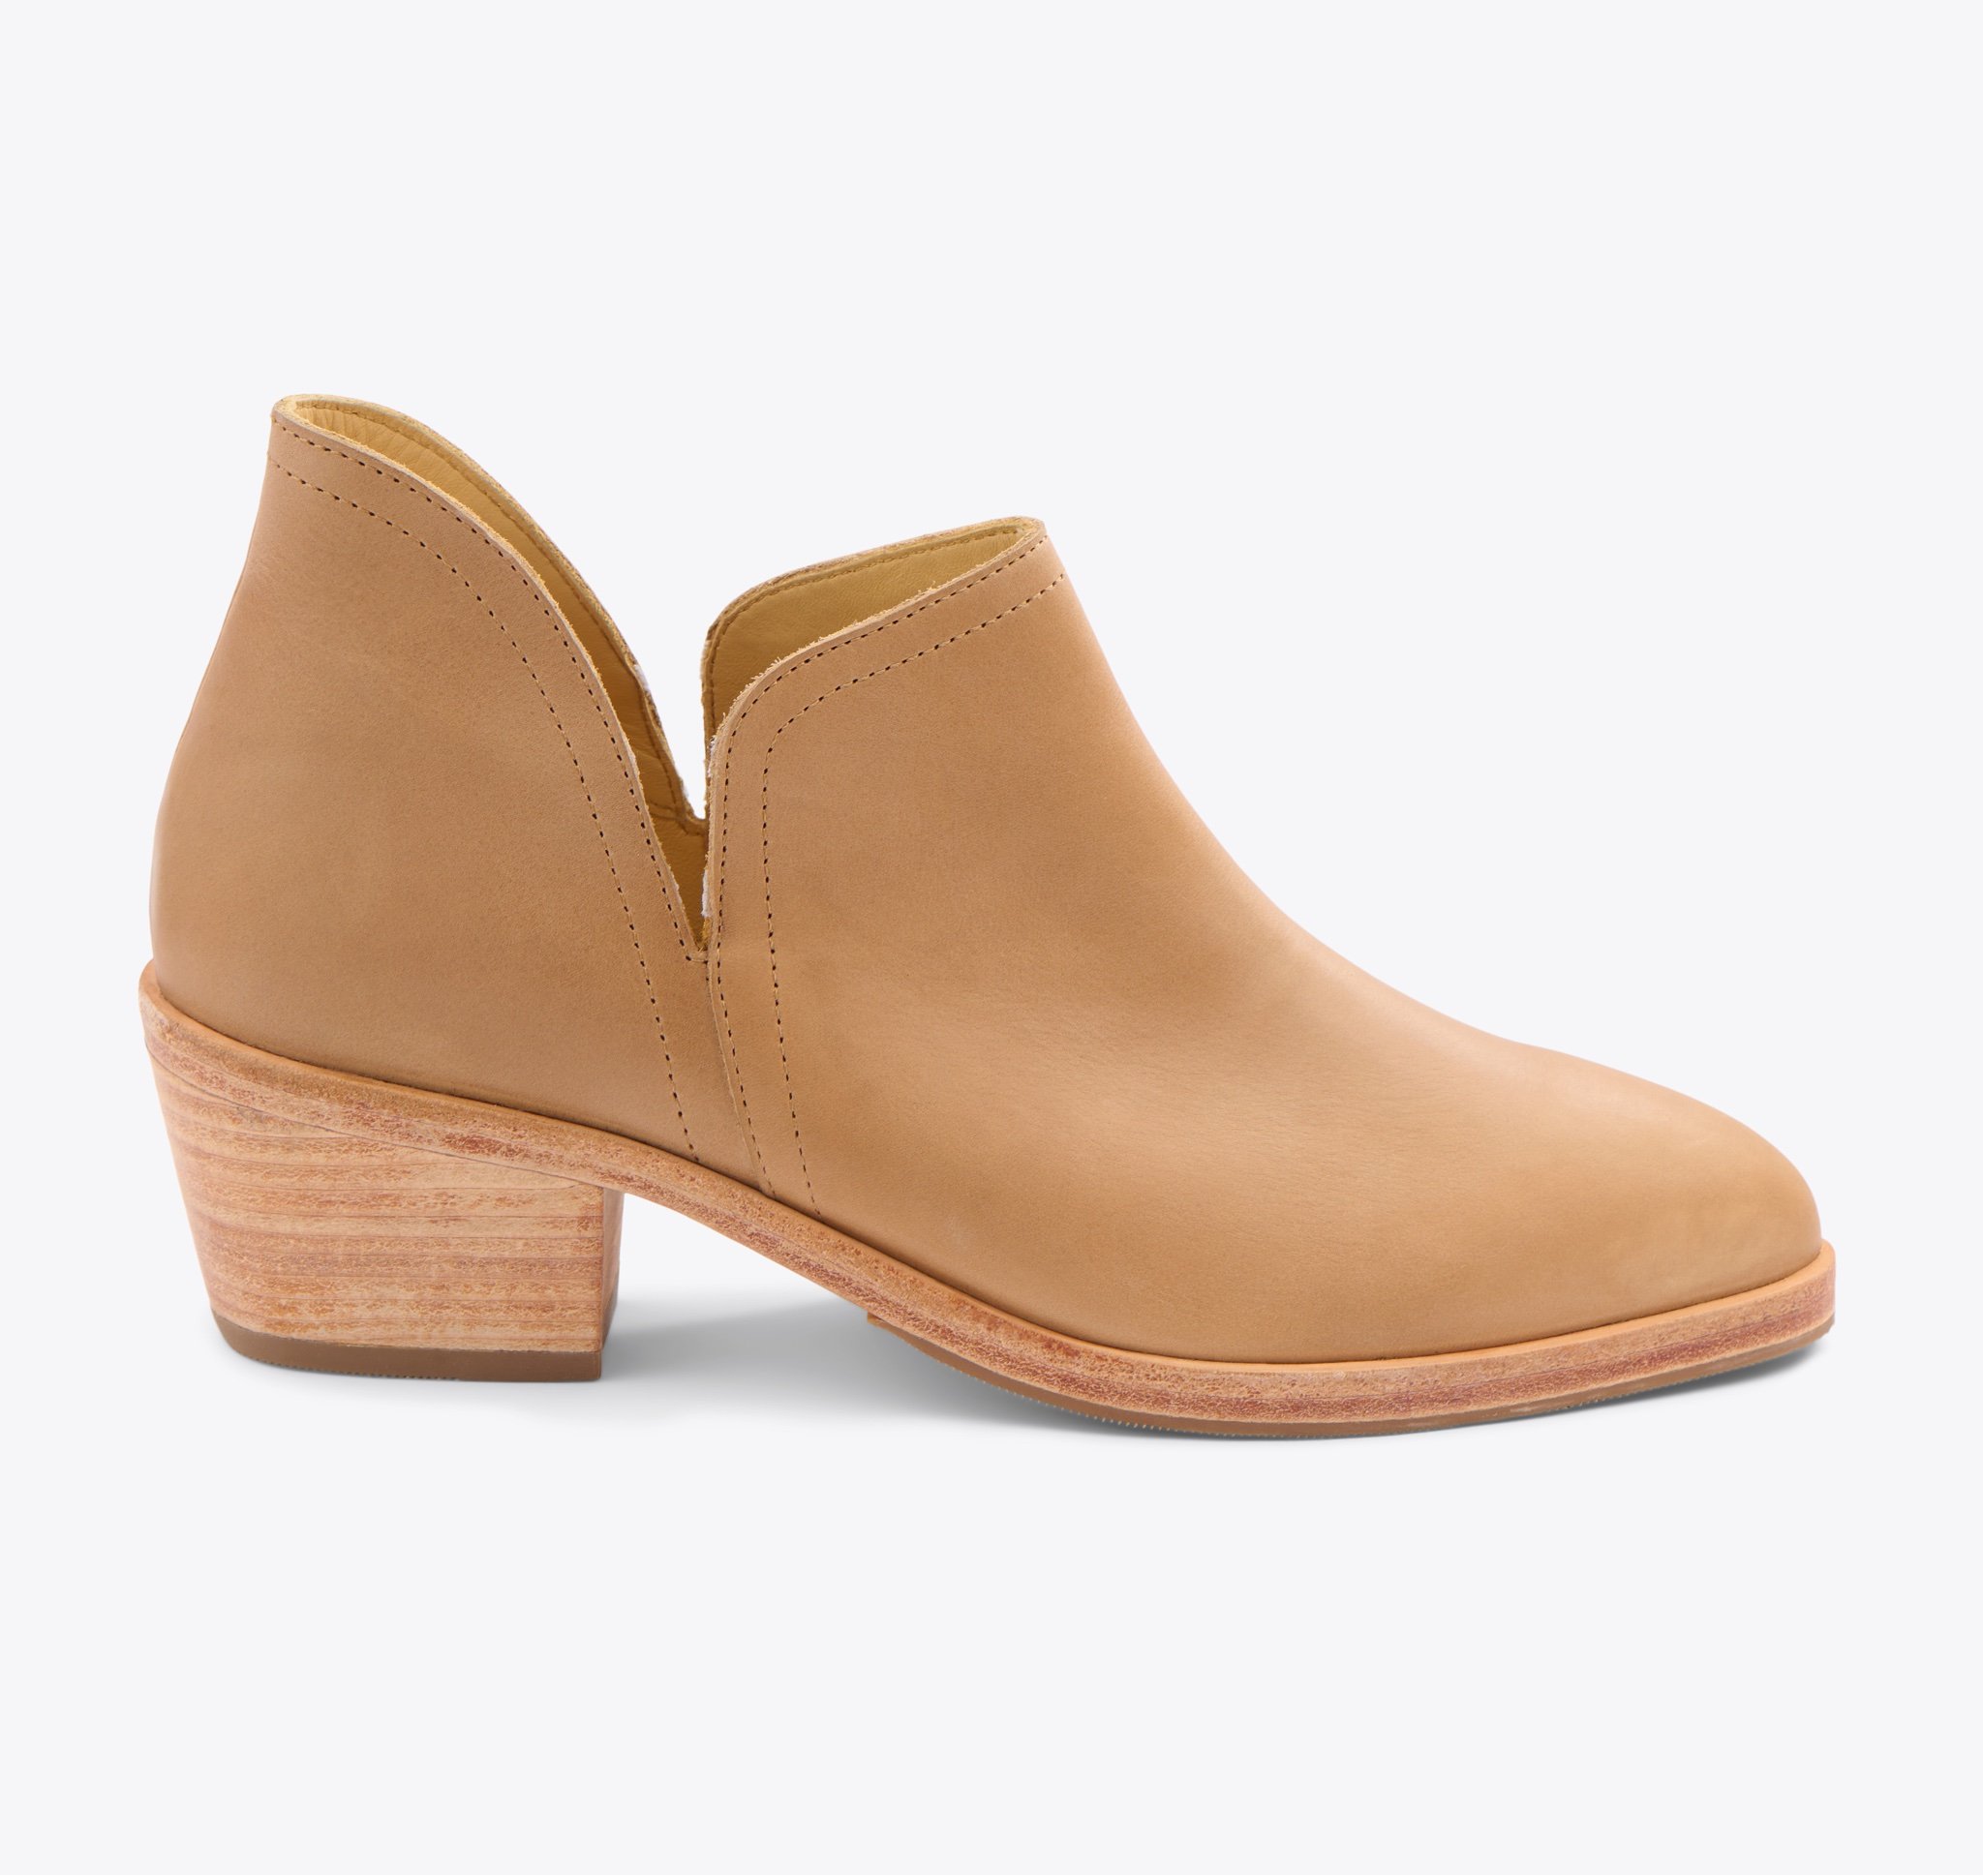 Nisolo Classic Ankle Bootie Almond - Every Nisolo product is built on the foundation of comfort, function, and design. 